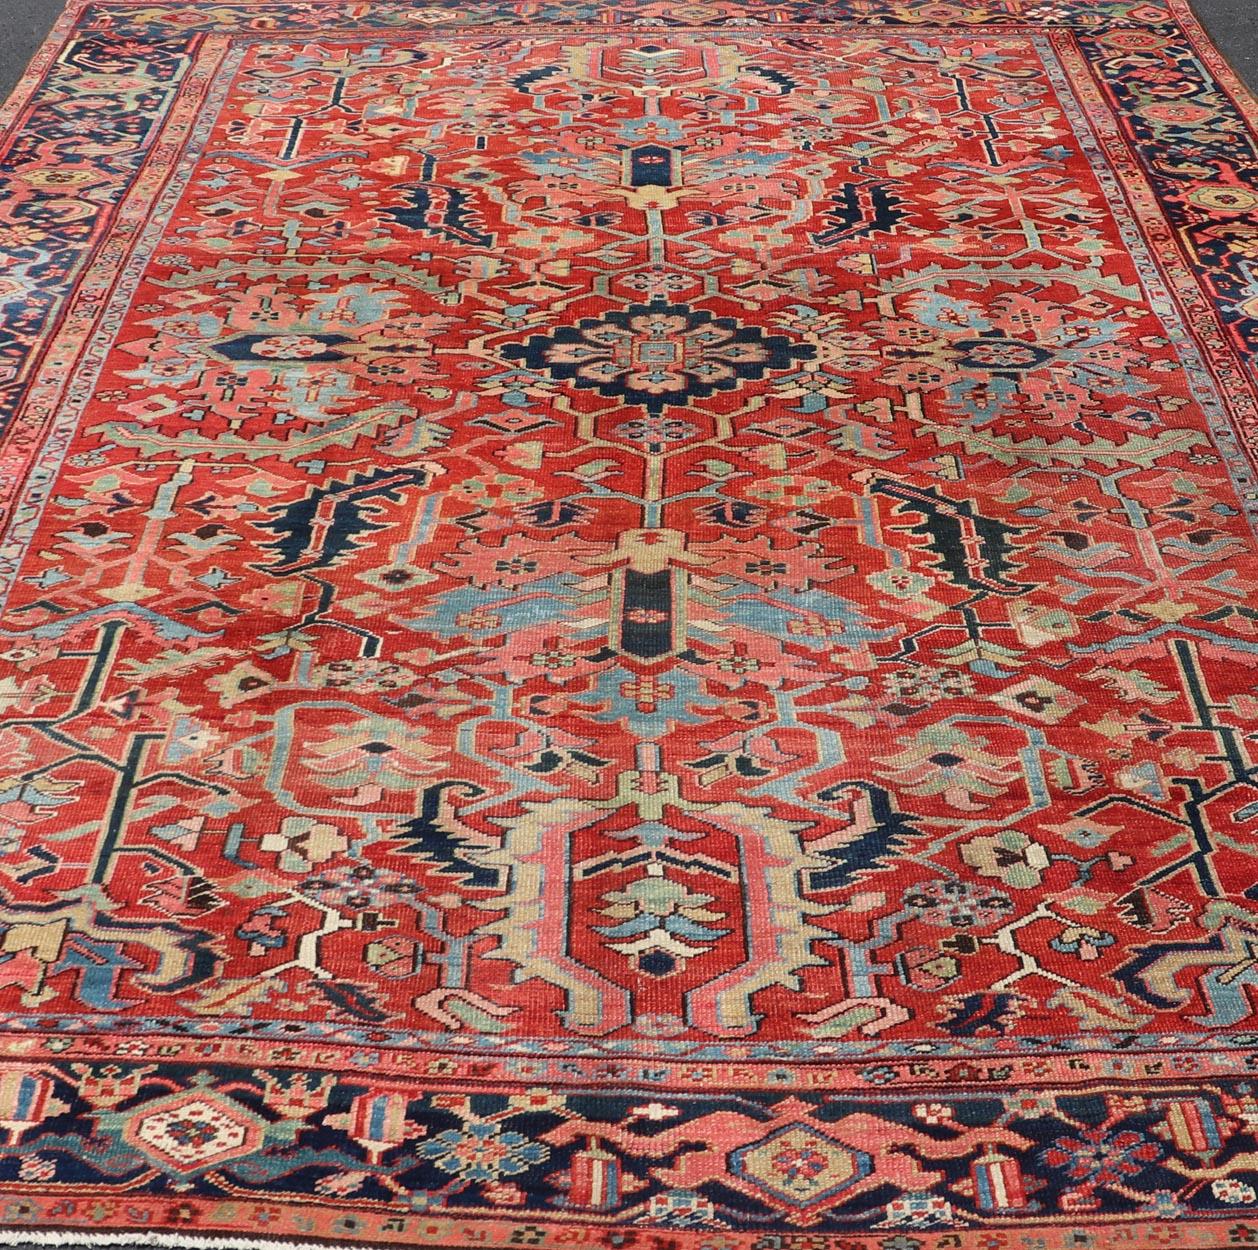 Antique Persian All Over Large Serapi Rug With Rust Red Background and Blue Border and large scale geometric Flowers. Keivan Woven Arts / Rug / C-0301, country of origin / type: Iran /Serapi, circa 1900. 

Measures: 10' x 13'10.   

This Antique